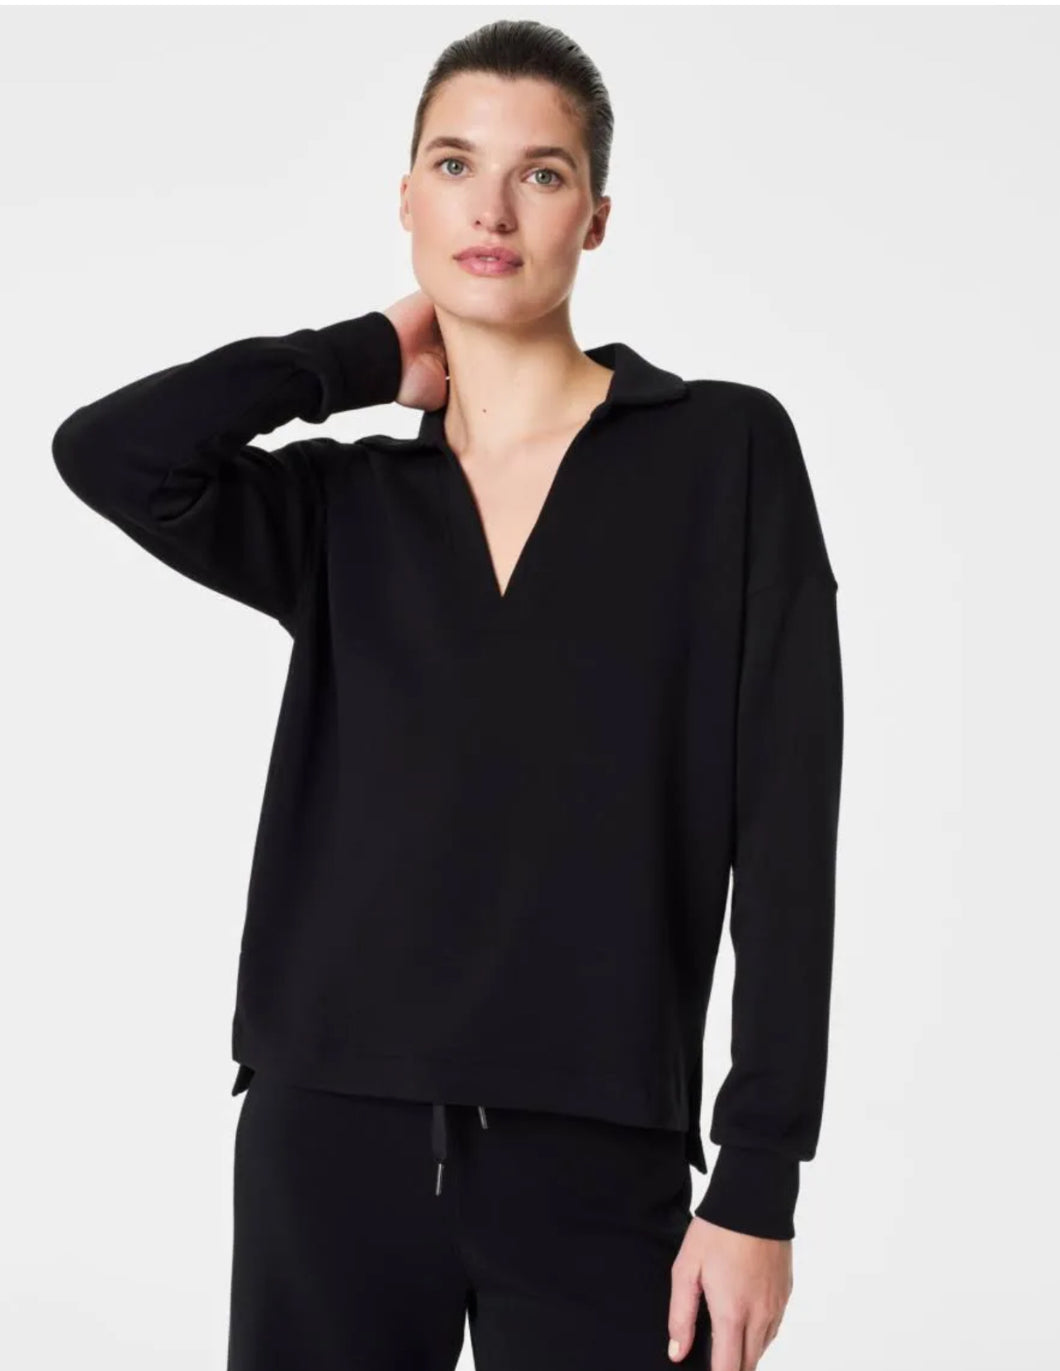 Spanx: AirEssentials Polo Top in Very Black